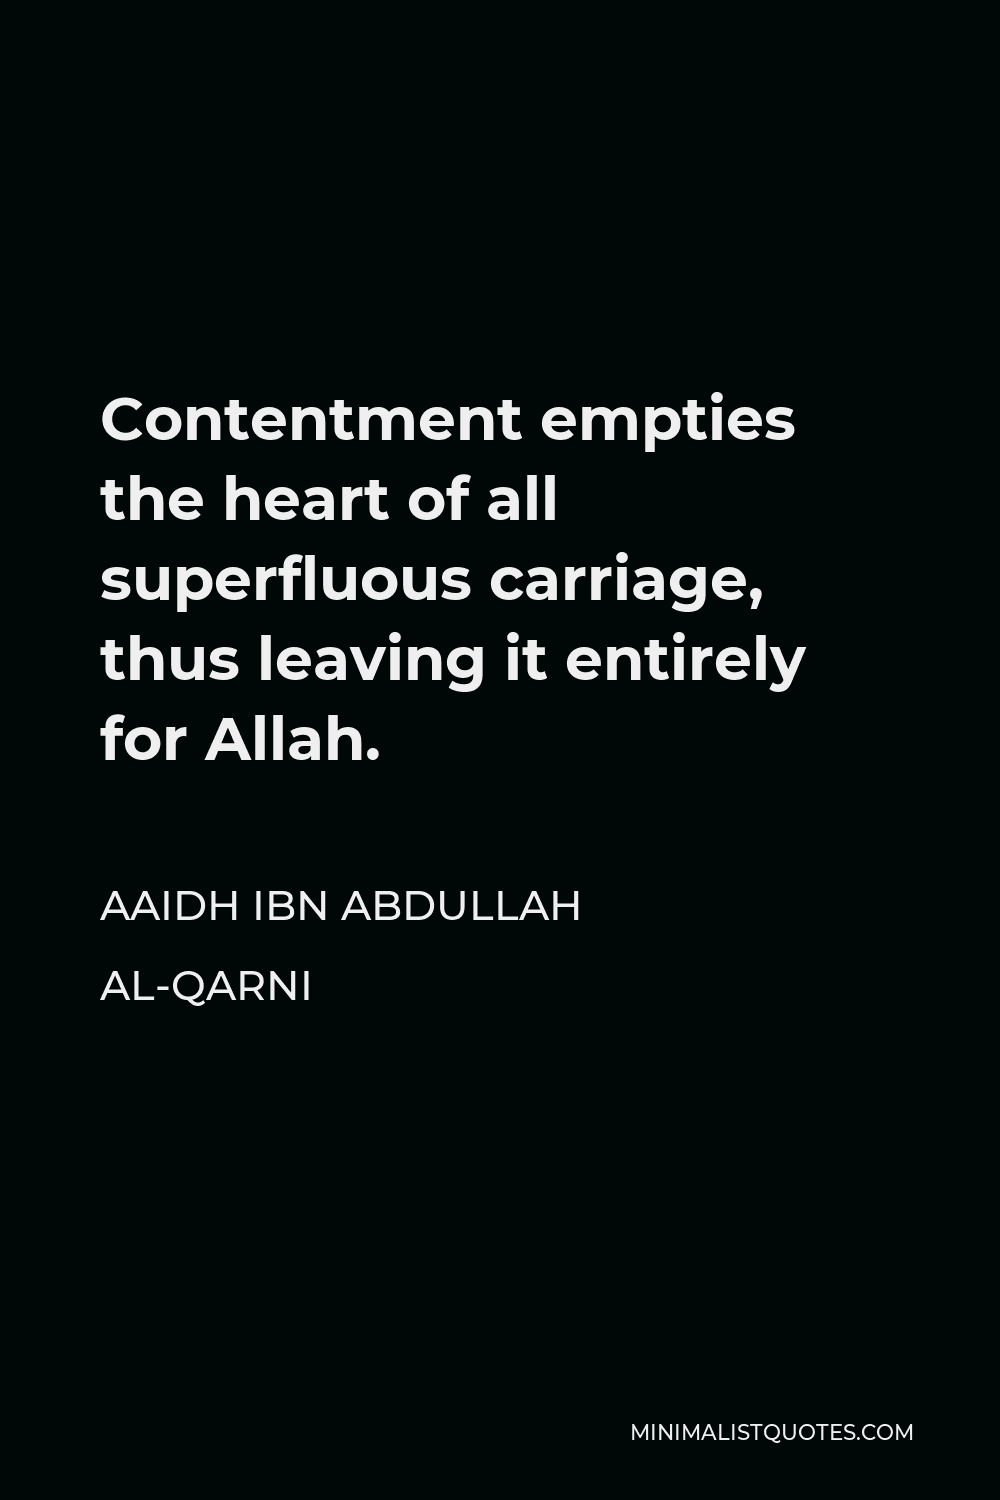 Aaidh ibn Abdullah al-Qarni Quote - Contentment empties the heart of all superfluous carriage, thus leaving it entirely for Allah.